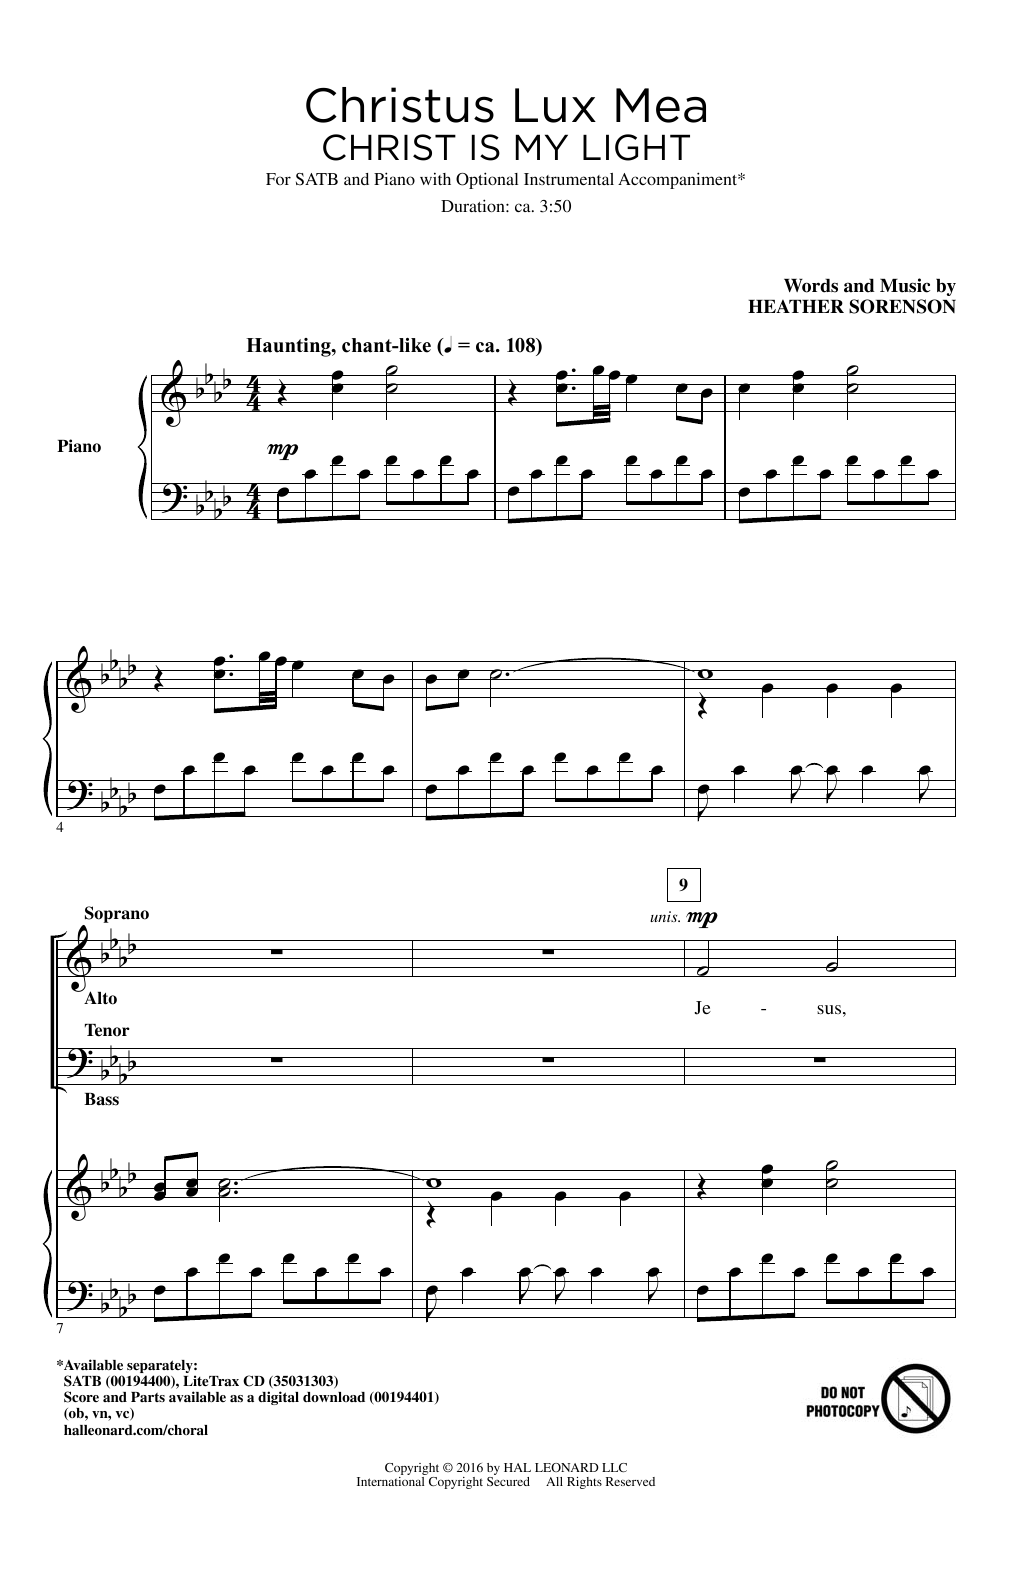 Heather Sorenson Christus Lux Mea (Christ Is My Light) sheet music notes and chords. Download Printable PDF.